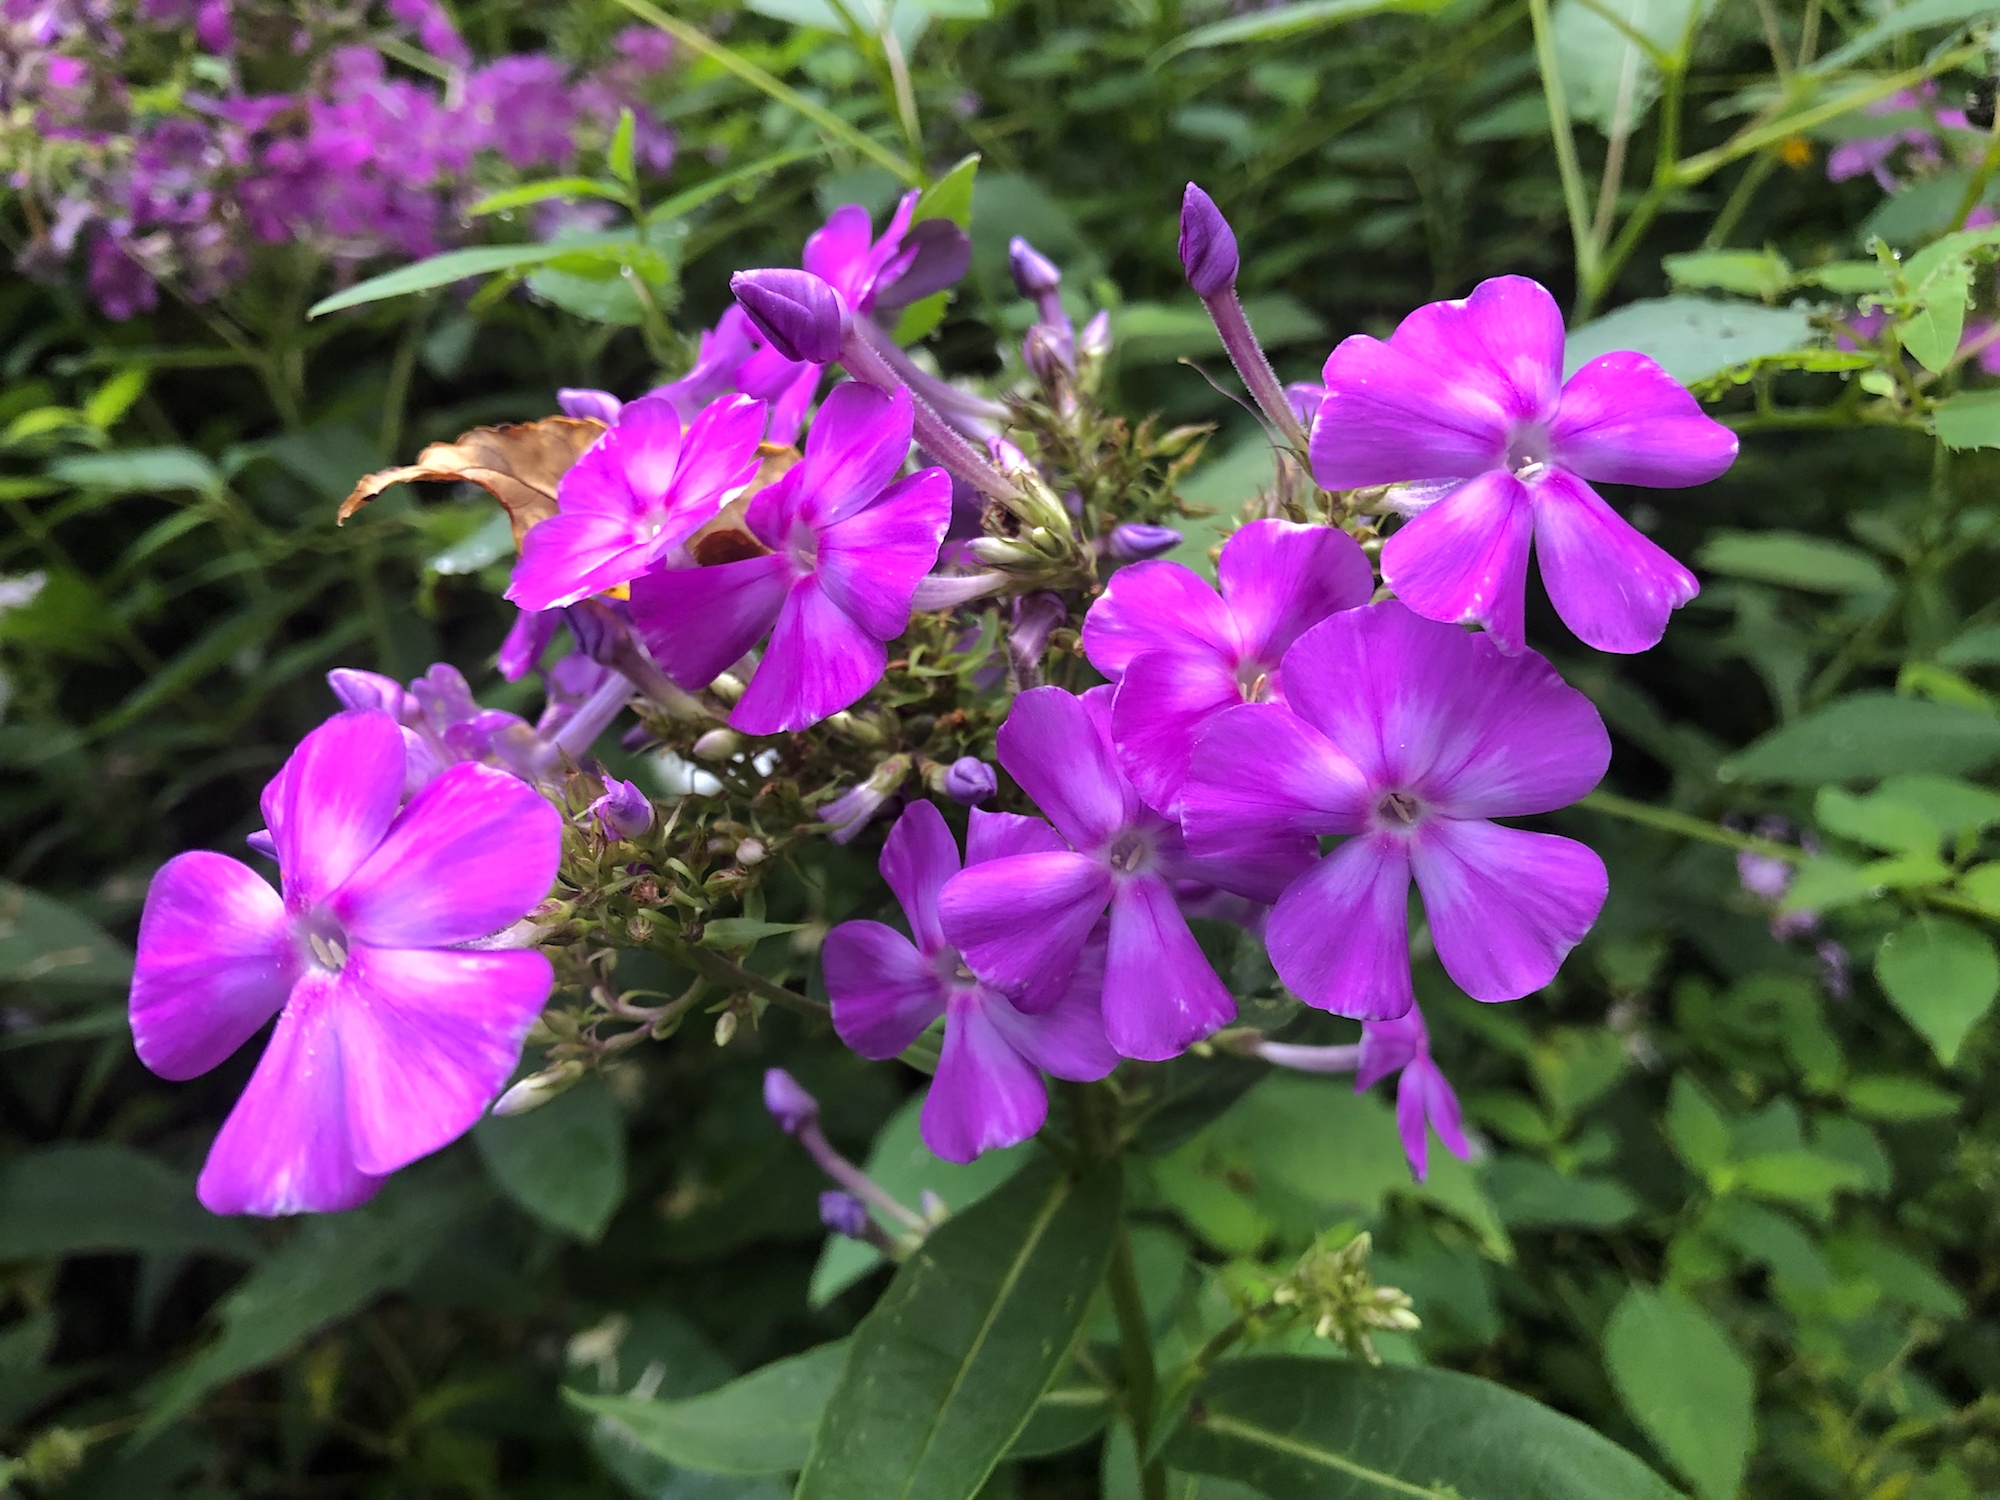 Tall Garden Phlox by Duck Pond on August 21, 2019.